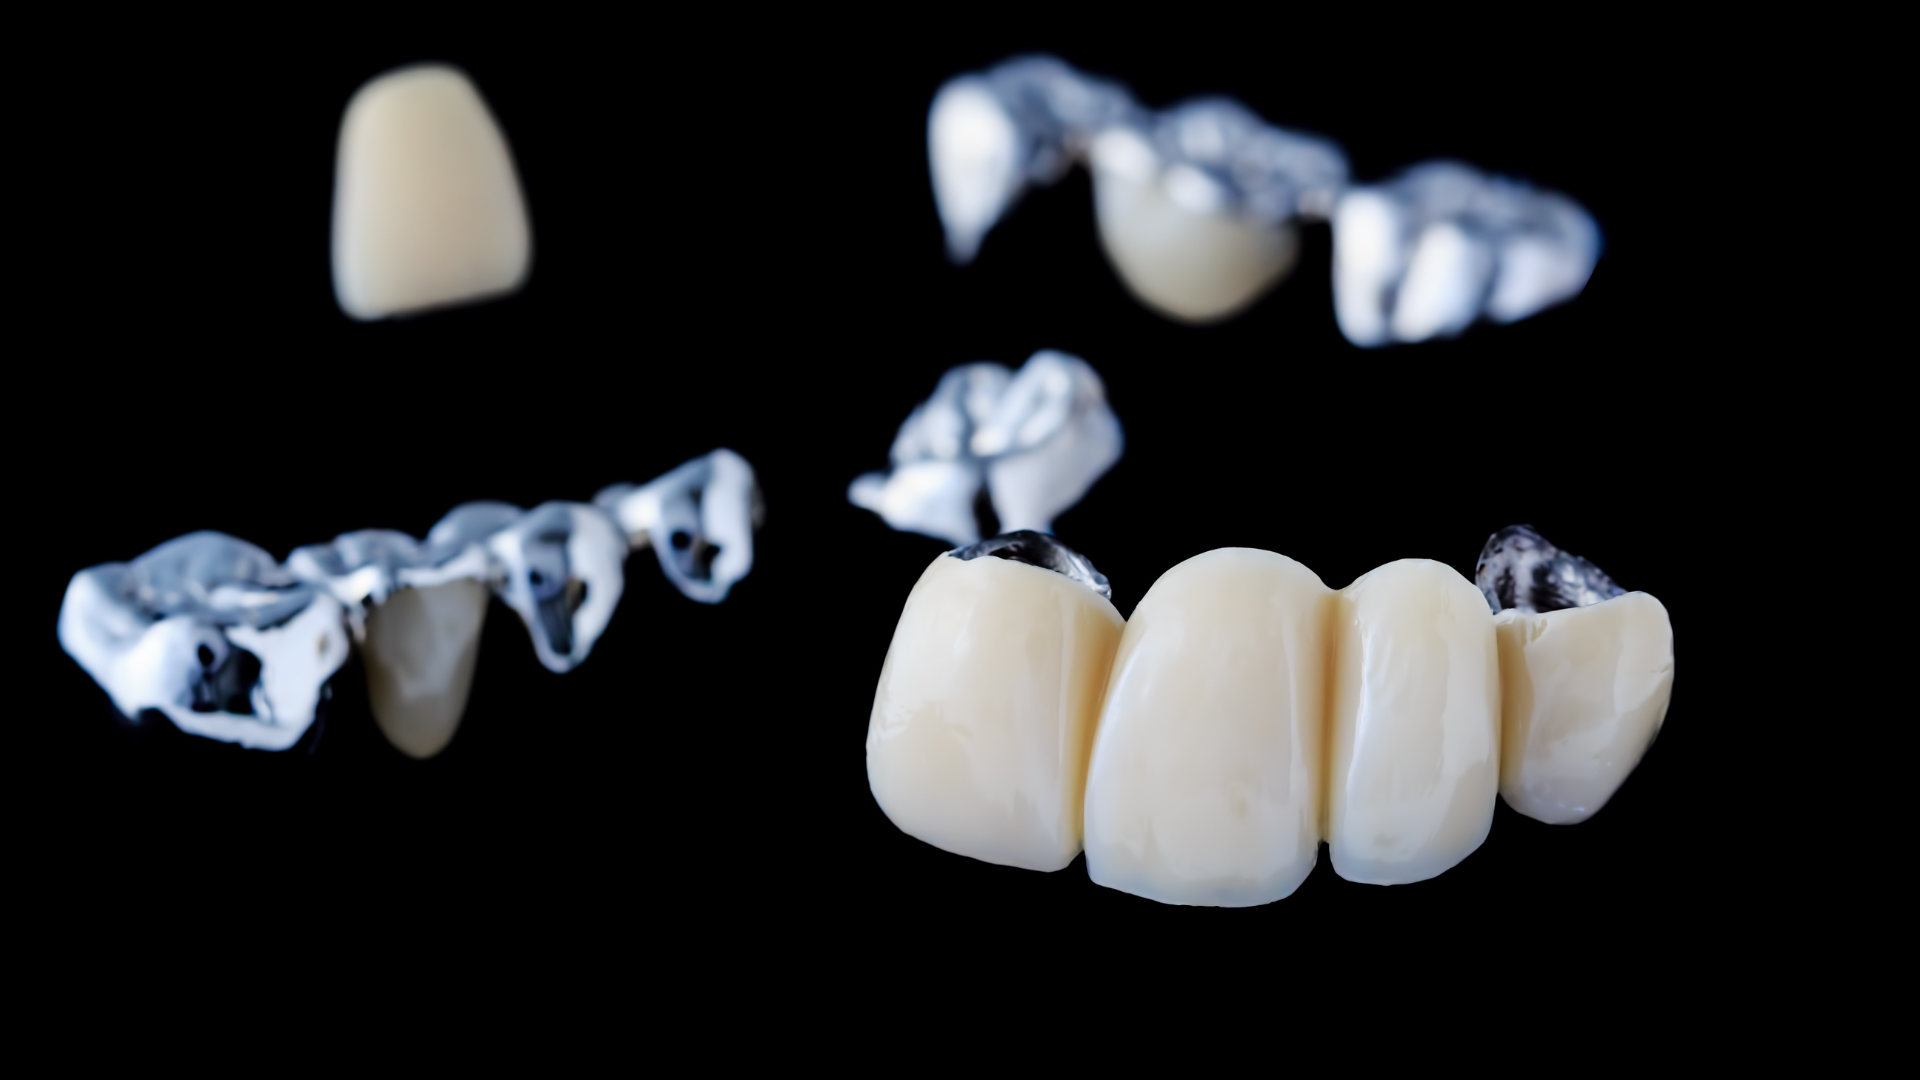 Everything You Need to Know About Dental Bridges